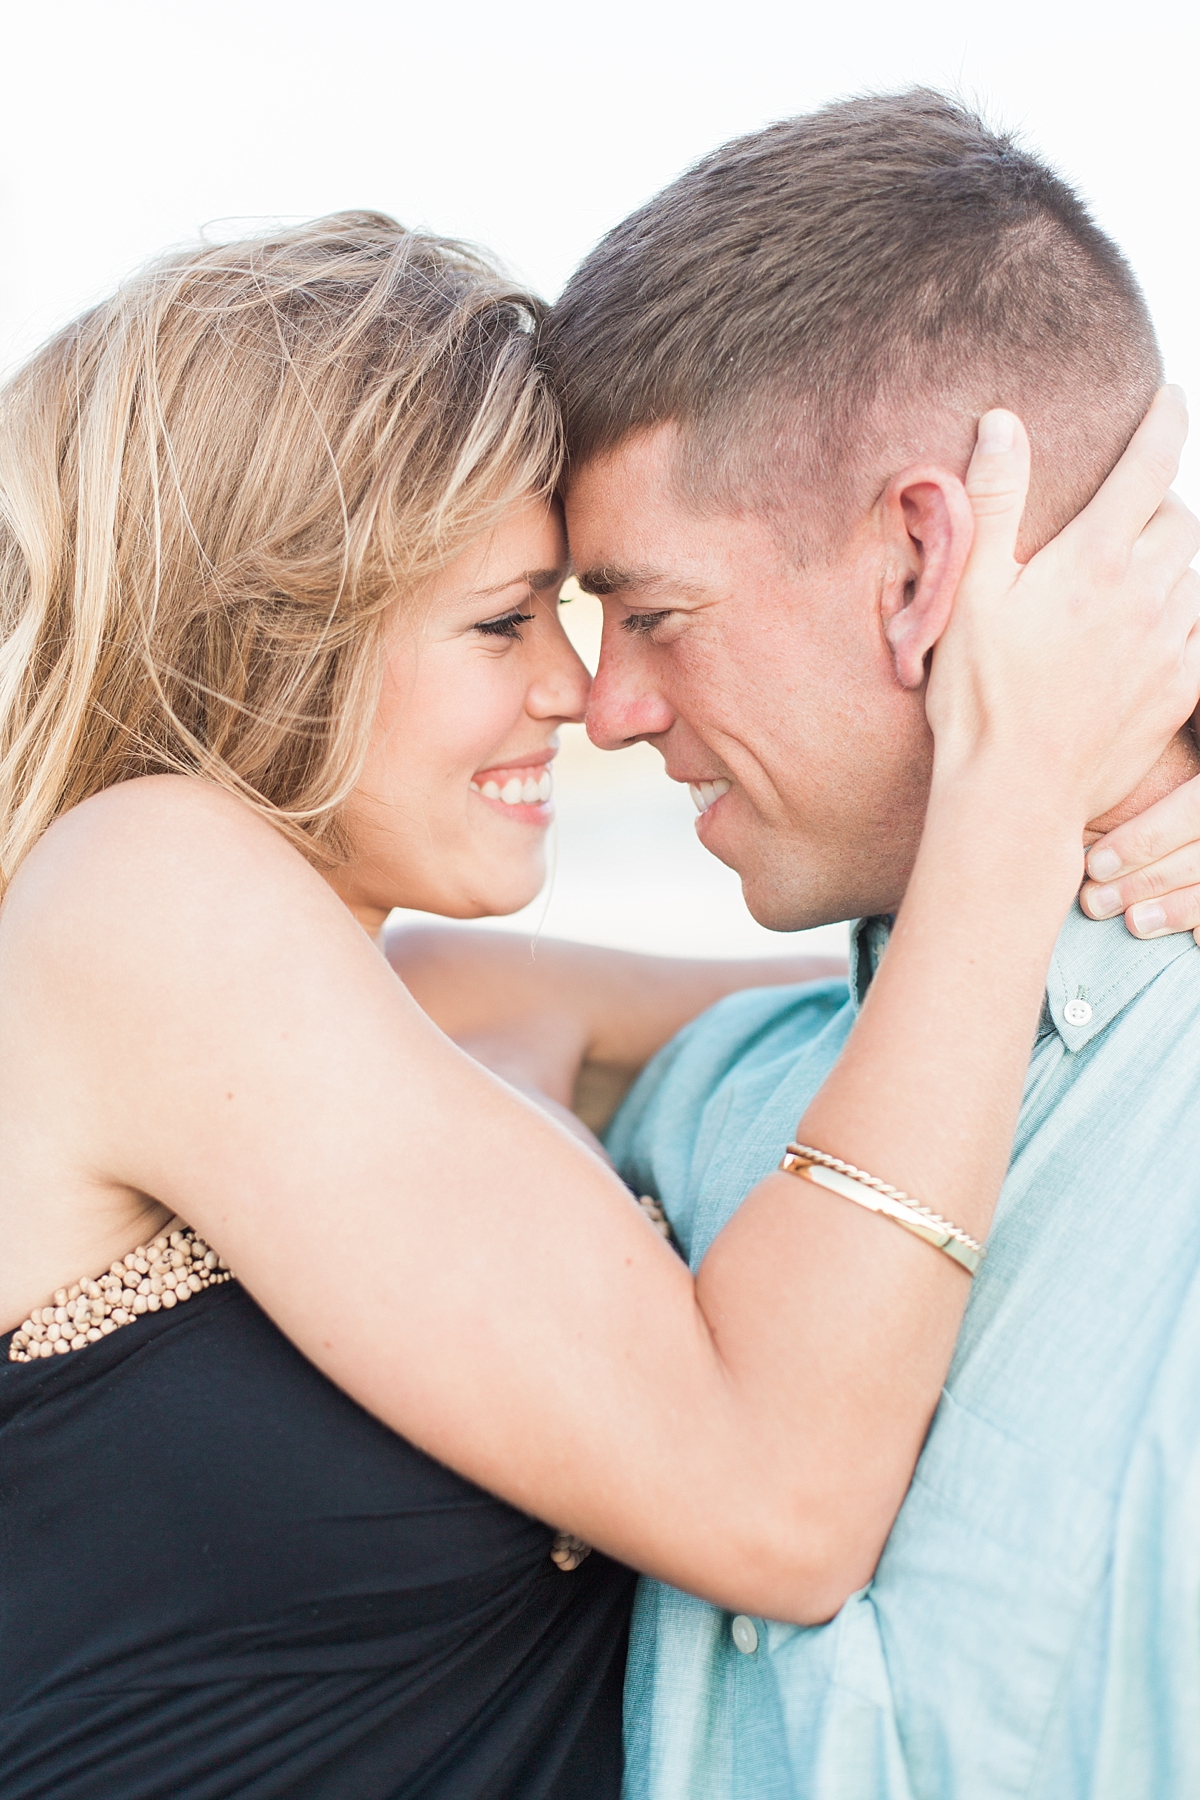 A dreamy couples session on the beaches of the Outer Banks, NC, as captured by Alicia Lacey Photography -- a Washington, DC anniversary photographer.